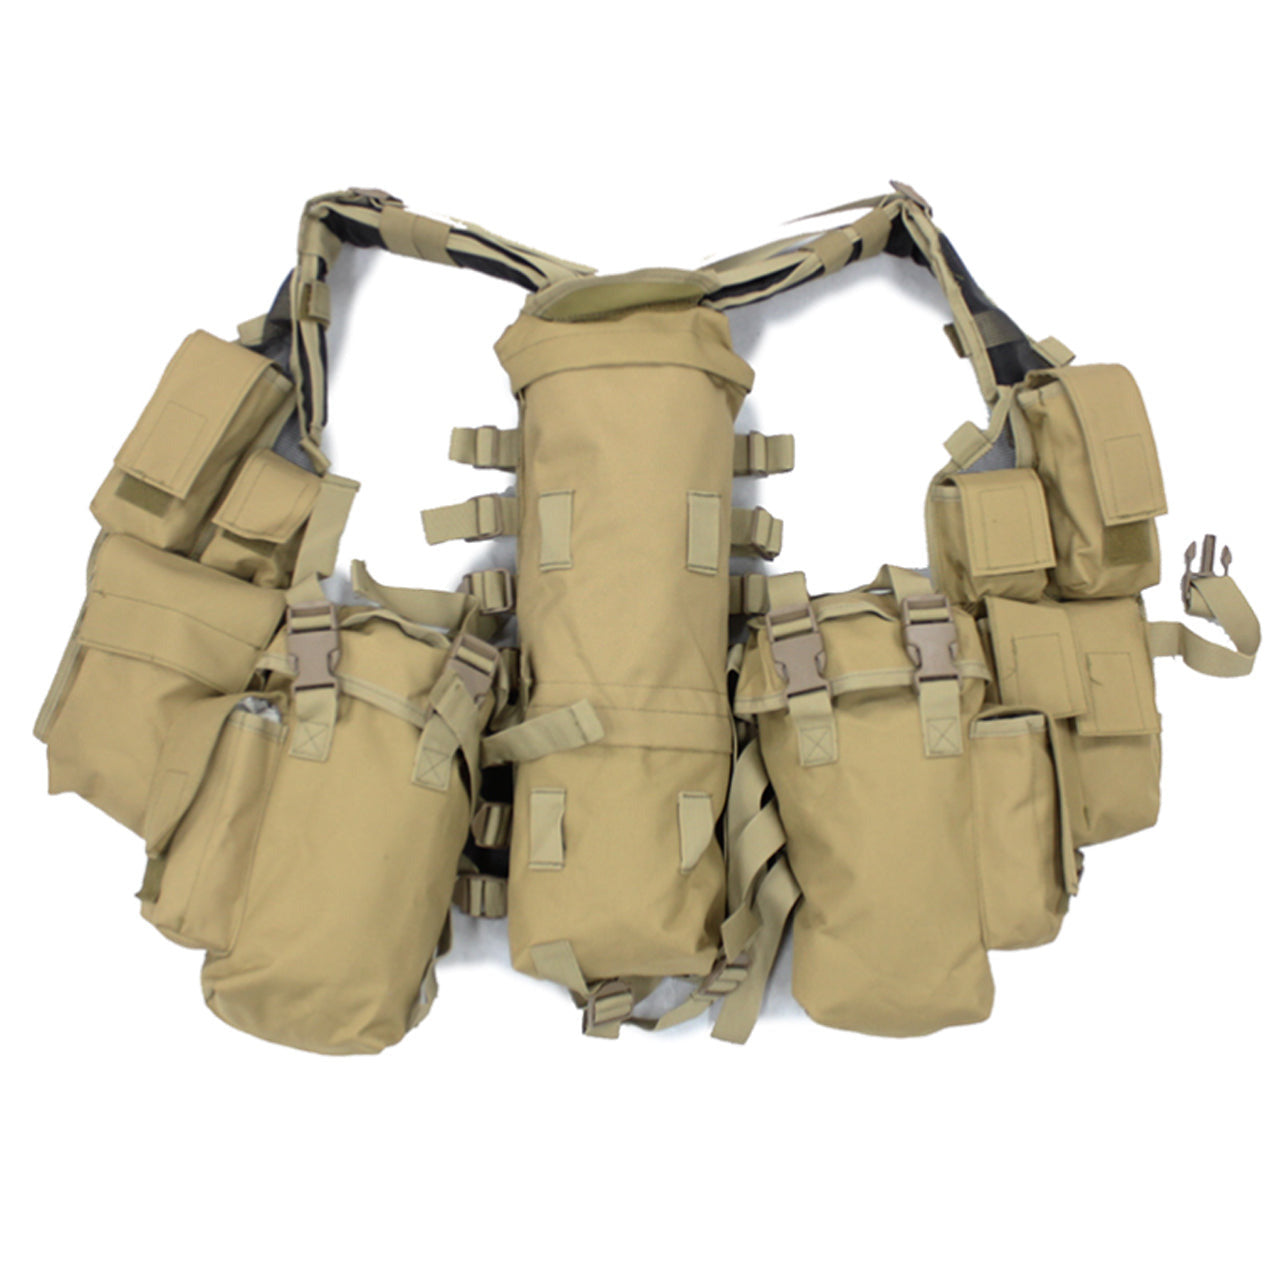 The South African Assault Vest is an all round tactical vest with pockets of varying sizes to hold virtually all your Airsoft accessories and needs. The best feature of the SAAV is the large hip pocket on left and right sides which can be used as dump pockets, utility pouches, spares pouches or any combination of the three. The SAAV also has a long, thin back pouch which can be used for carrying a hydration bladder, spare clothing or water bottle. www.defenceqstore.com.au